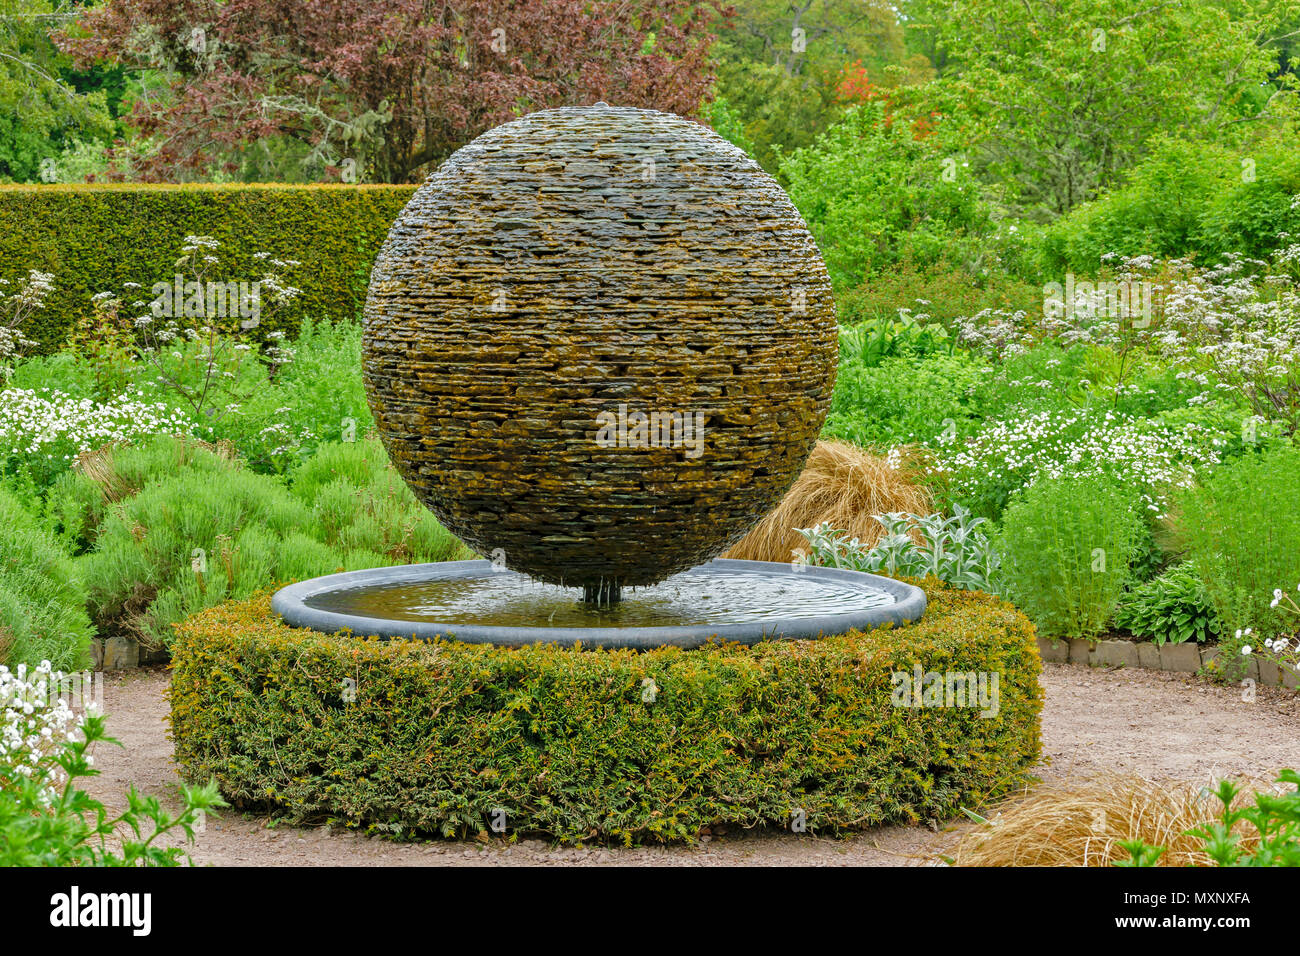 CAWDOR CASTLE NAIRN SCOTLAND GARDEN GLOBE FOUNTAIN MADE FROM SLATES AND FLAT STONES IN THE WHITE GARDEN Stock Photo